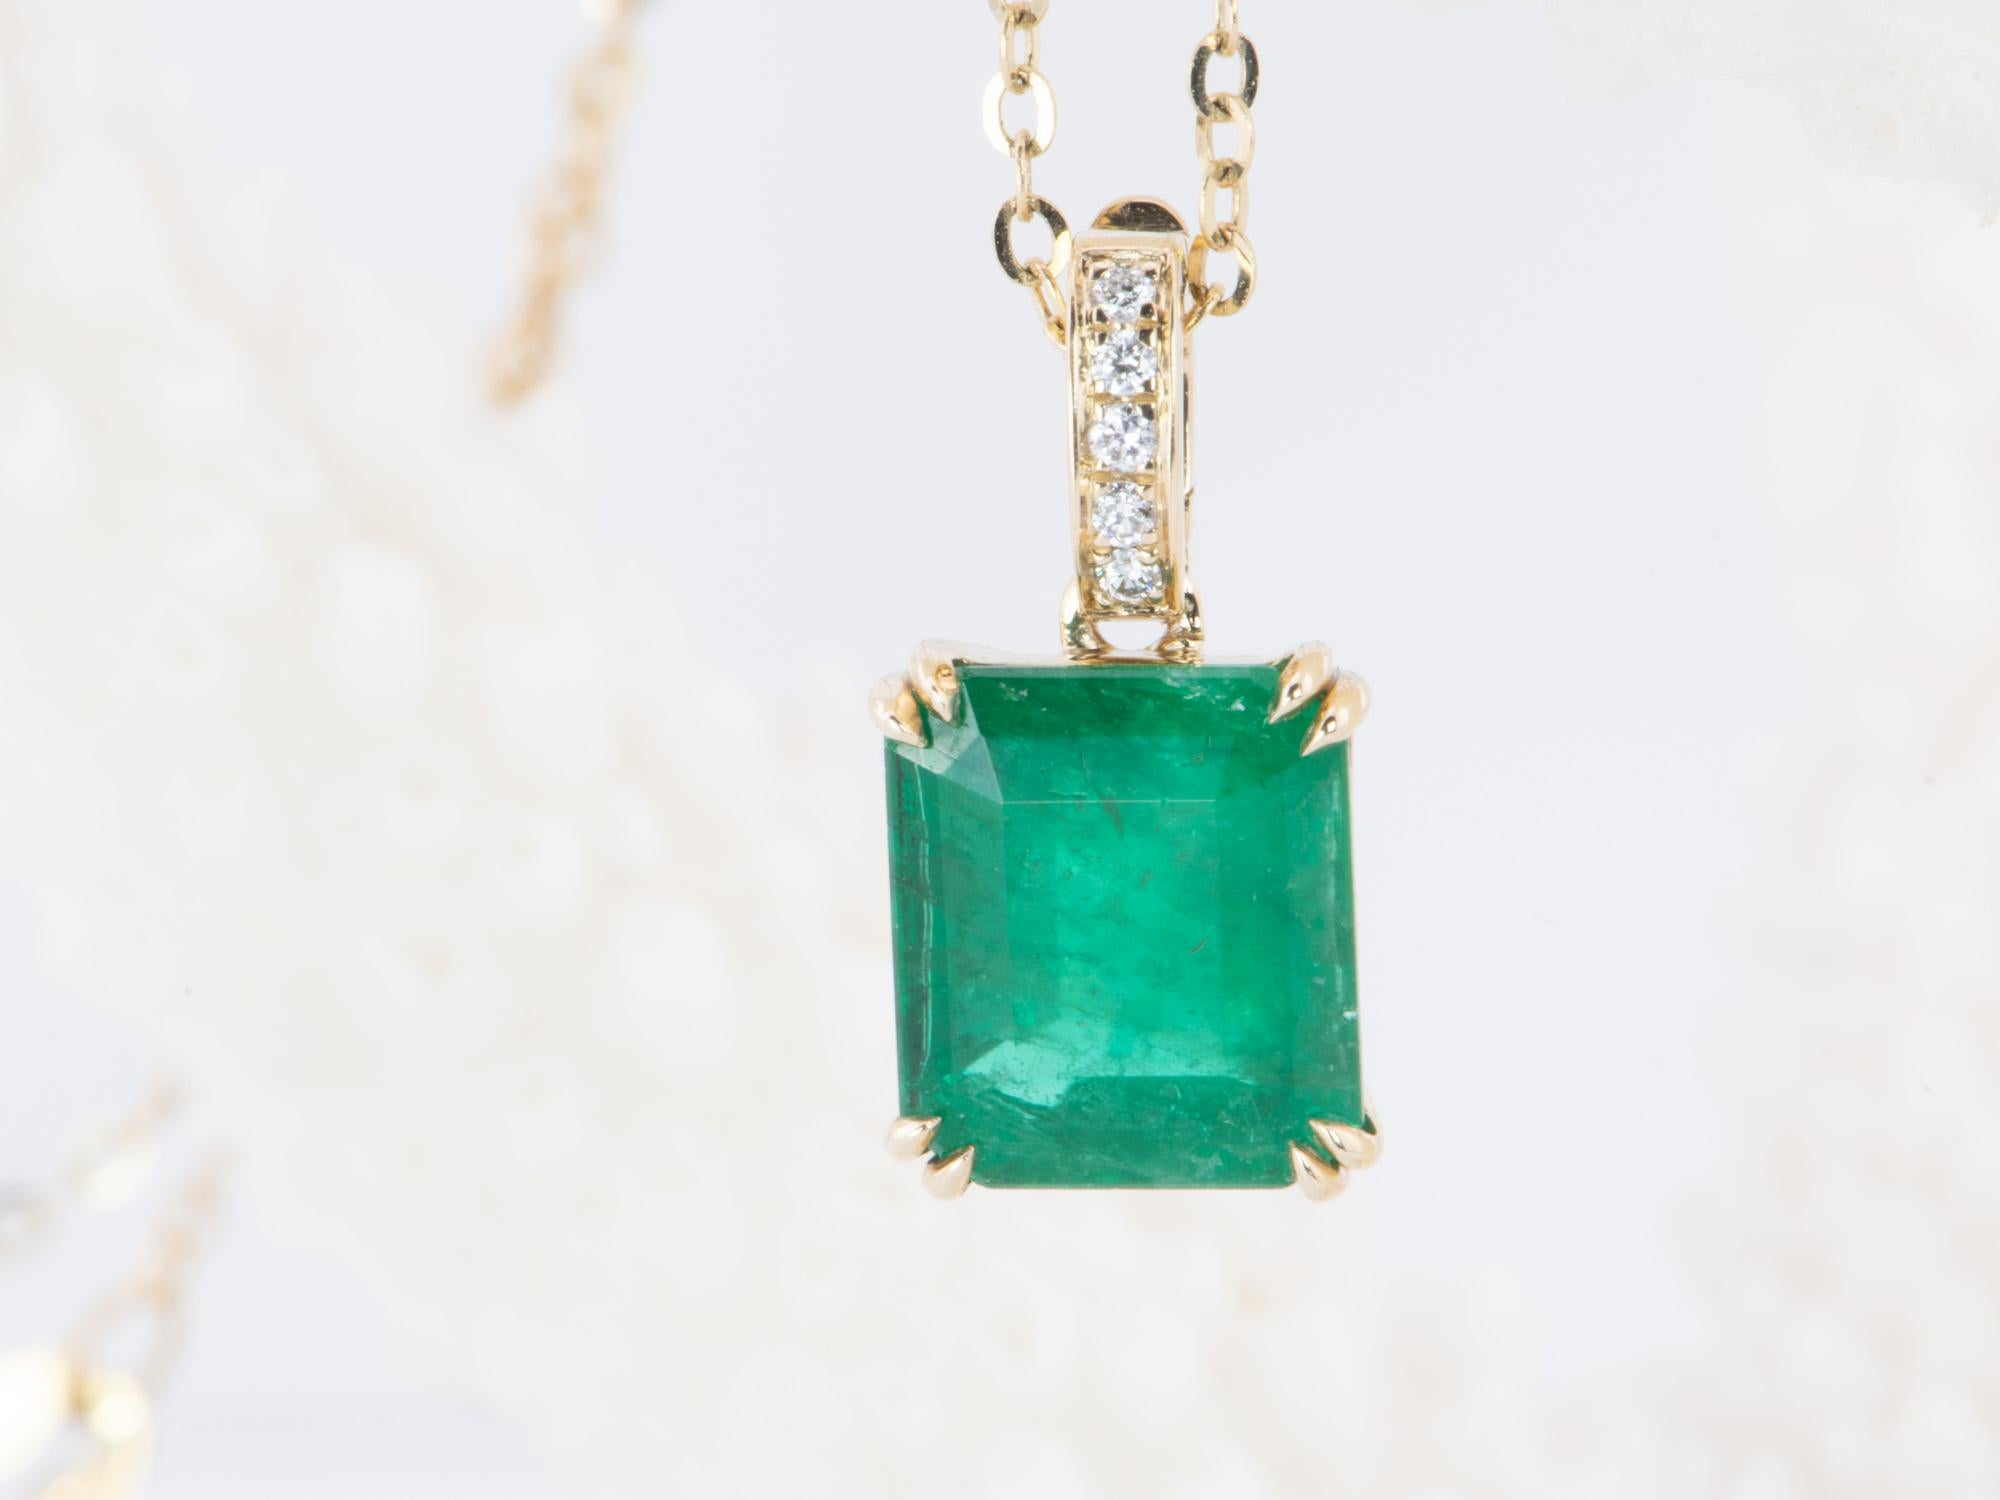 ♥ Solid 14K gold pendant set with a stunning emerald in the center, finished with a diamond-accented bail that can be opened and clipped onto a chain
♥ The pendant measures 7.2mm in width, 8.3mm in length, and is 4.6mm thick. The bail is 6mm long